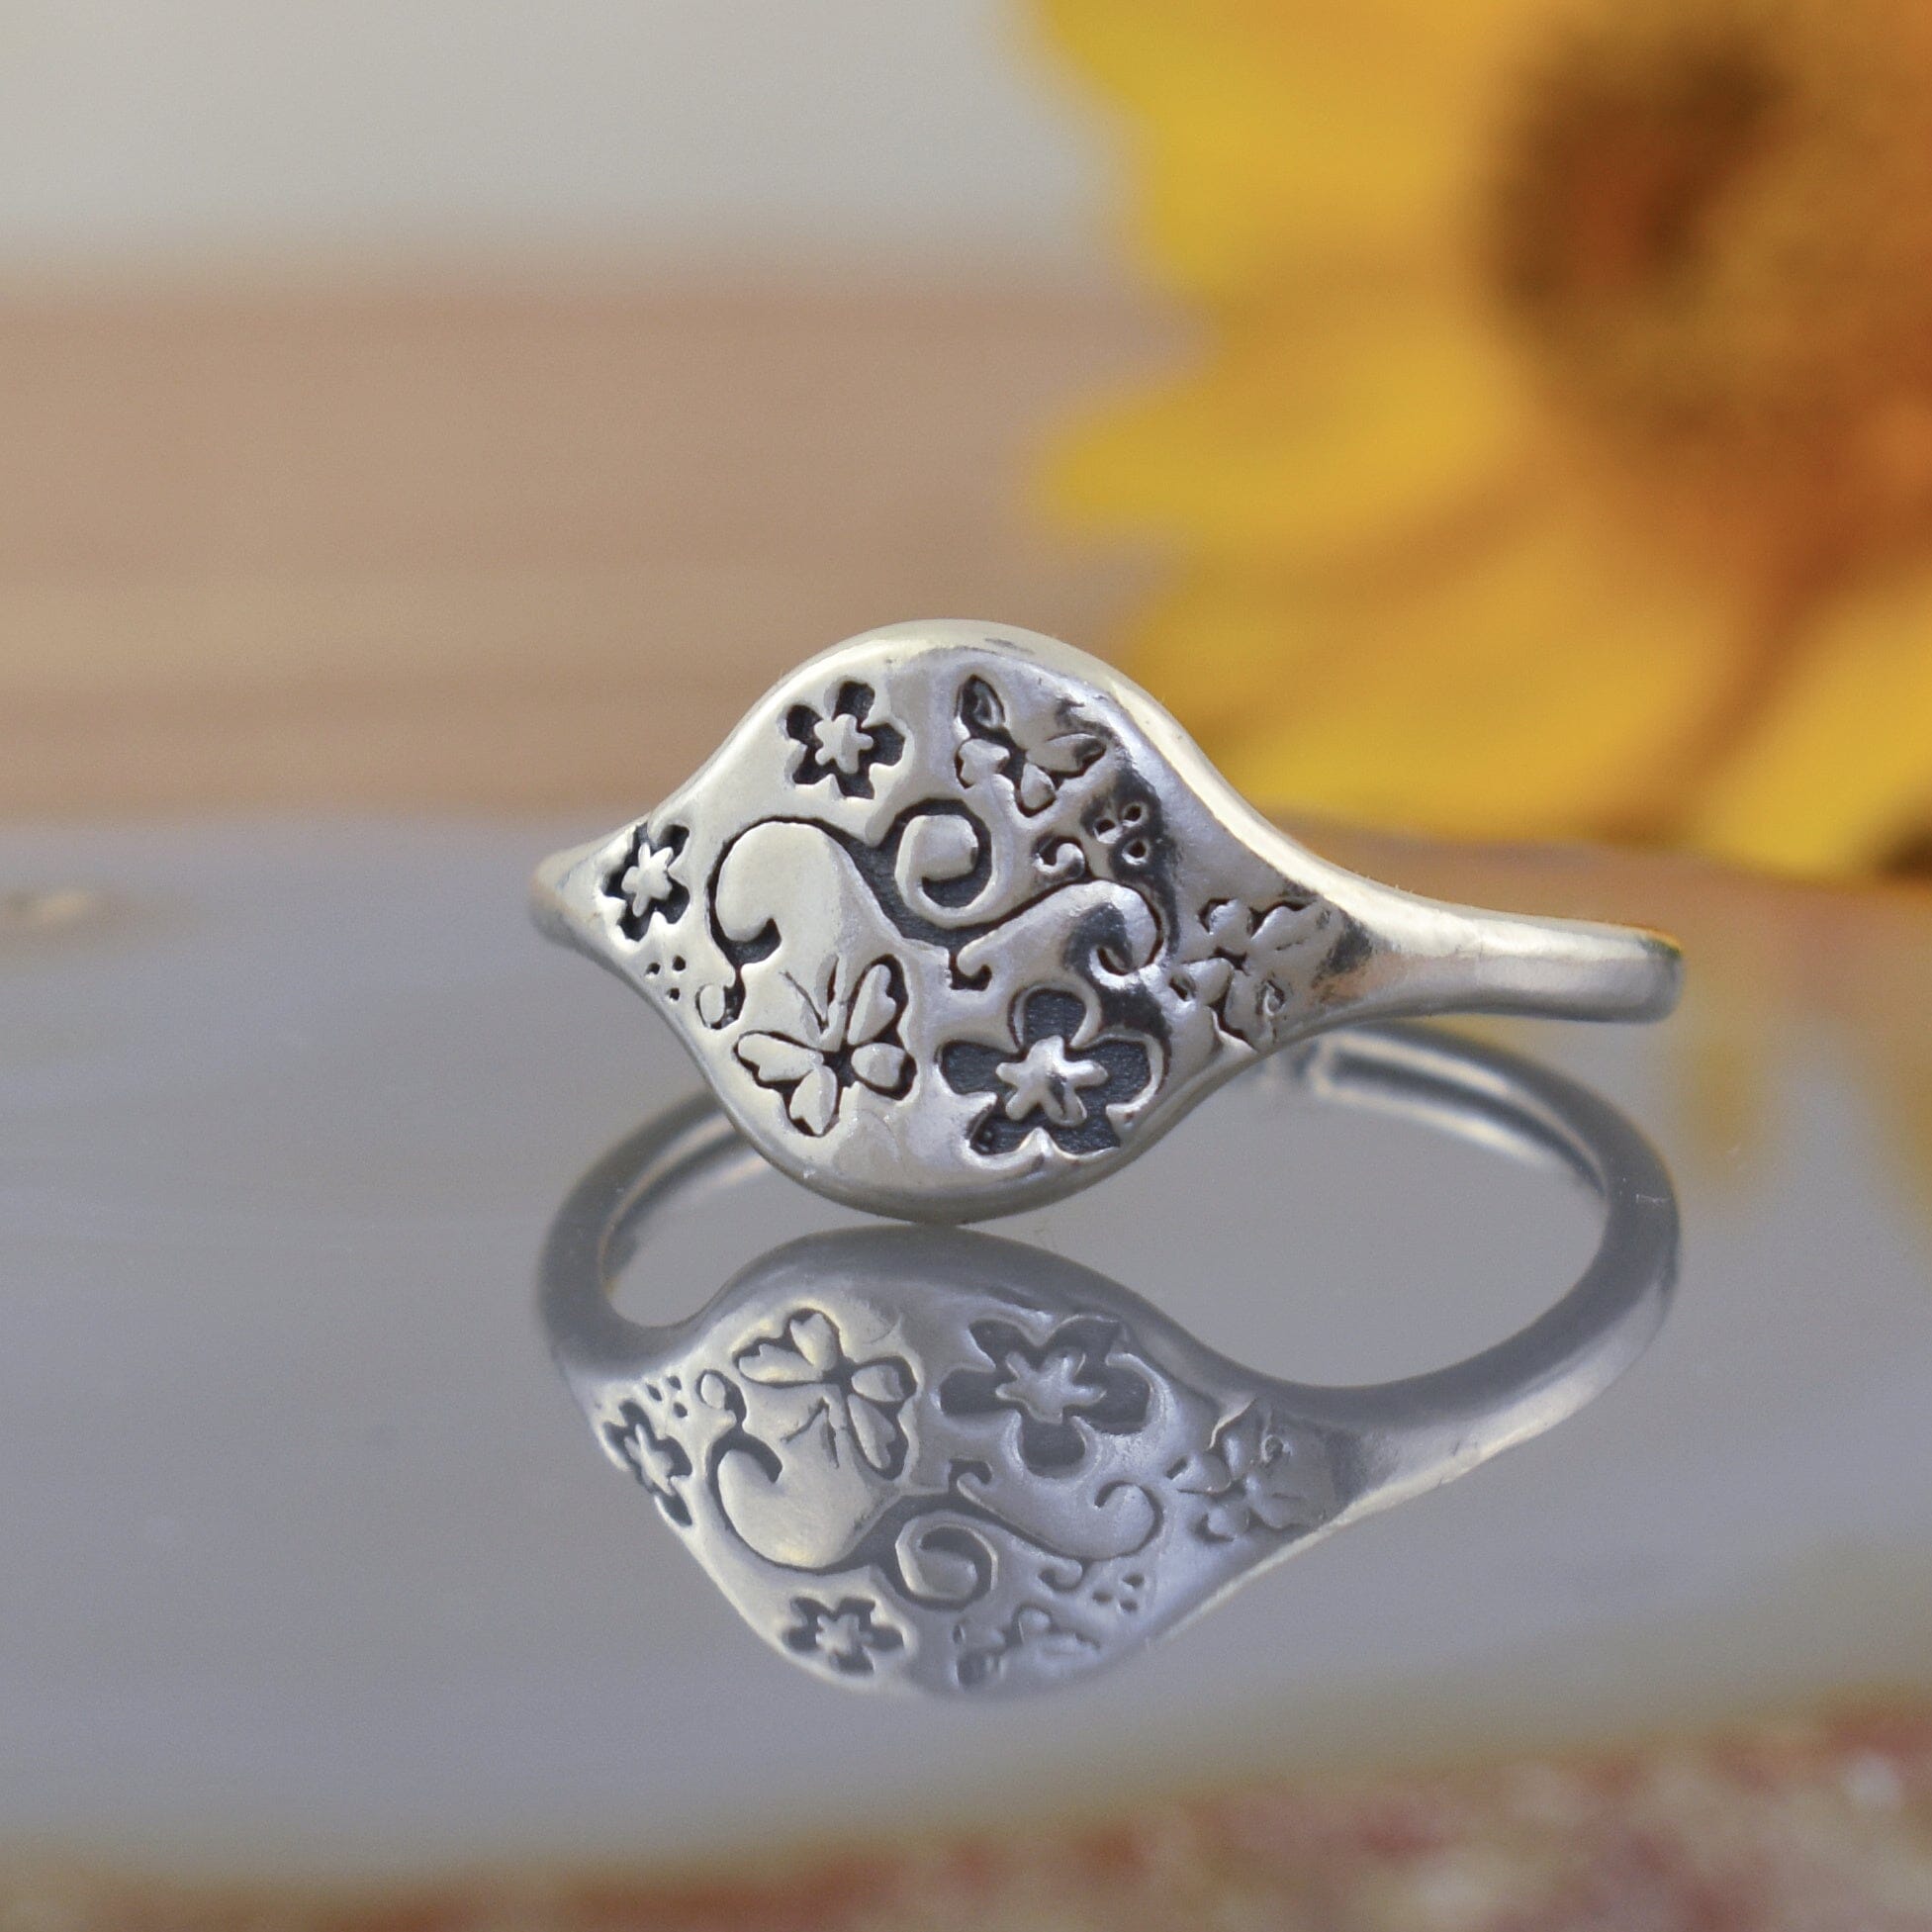 sterling silver signet style ring engraved with flowers and butterflies